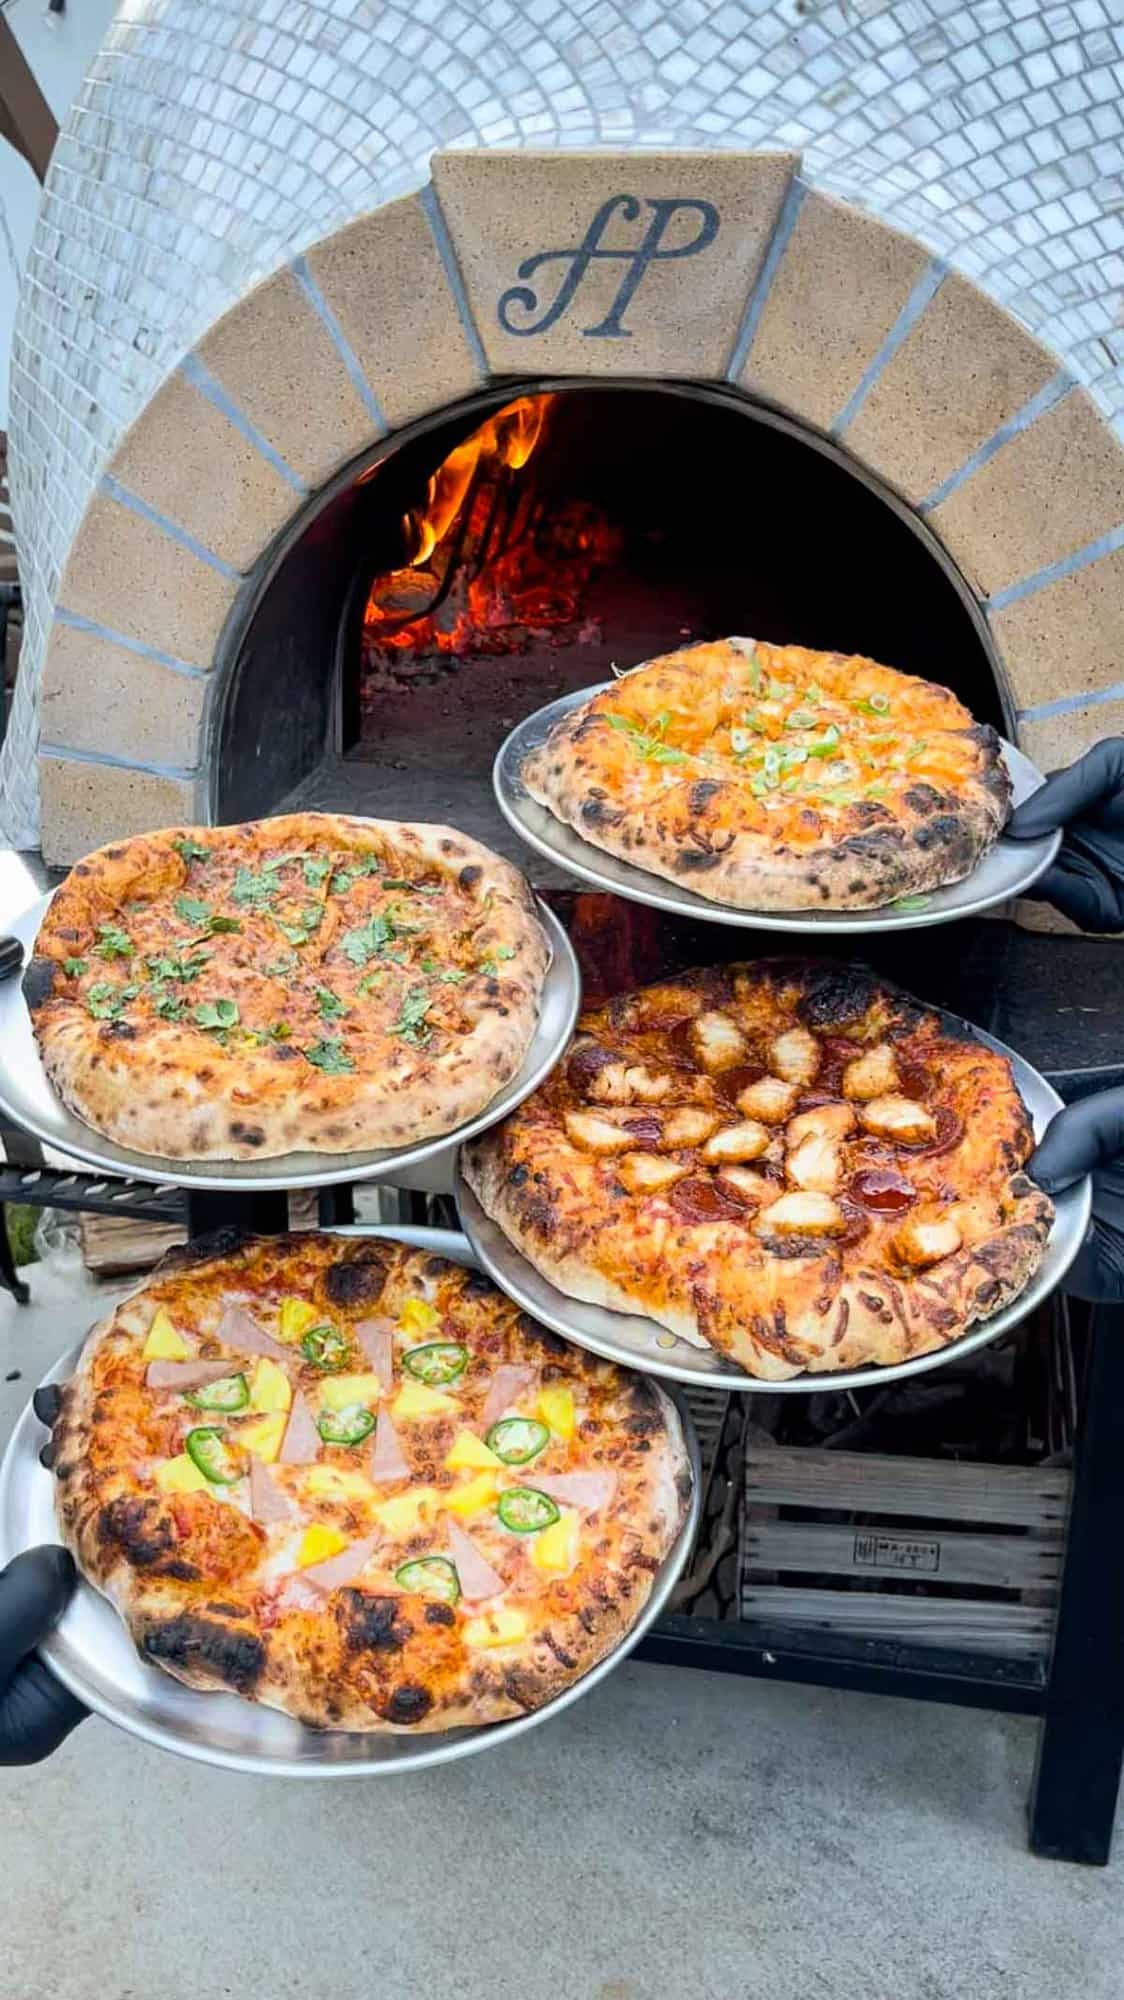 Four Pizzas to showcase our Food Trend Predictions for 2023.